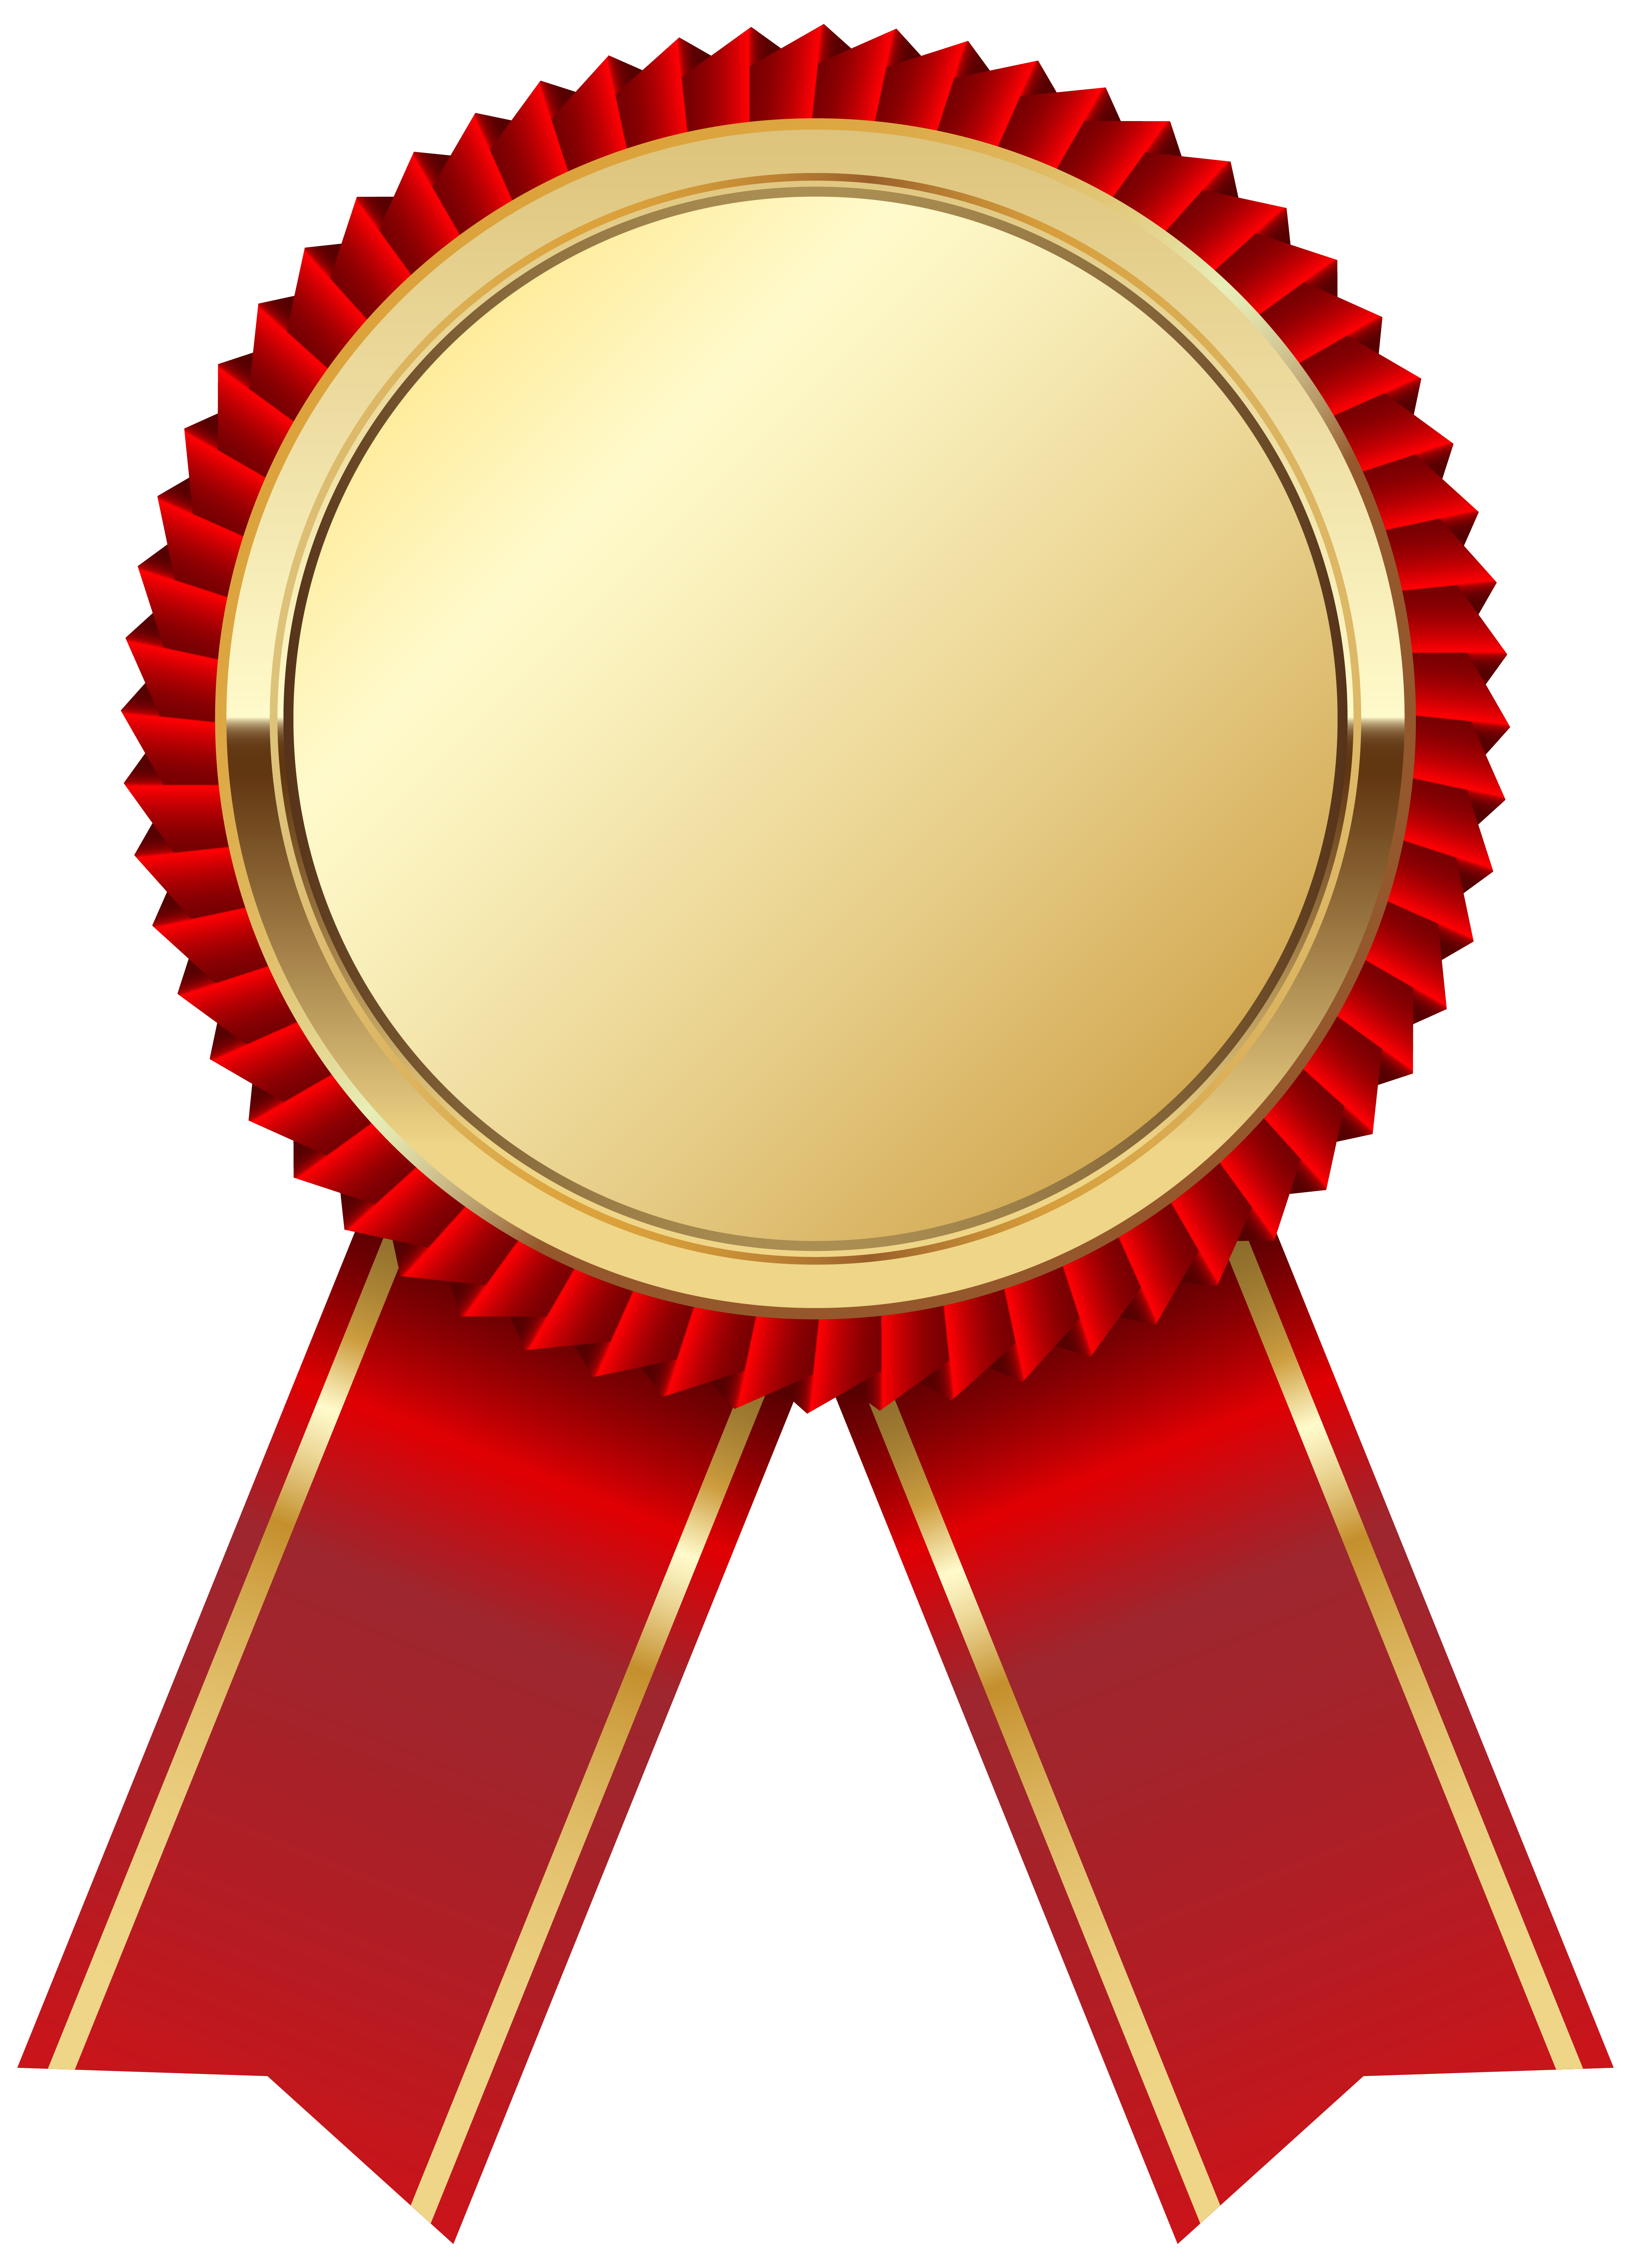 Free Platinum Medal Cliparts, Download Free Clip Art, Free Clip Art on